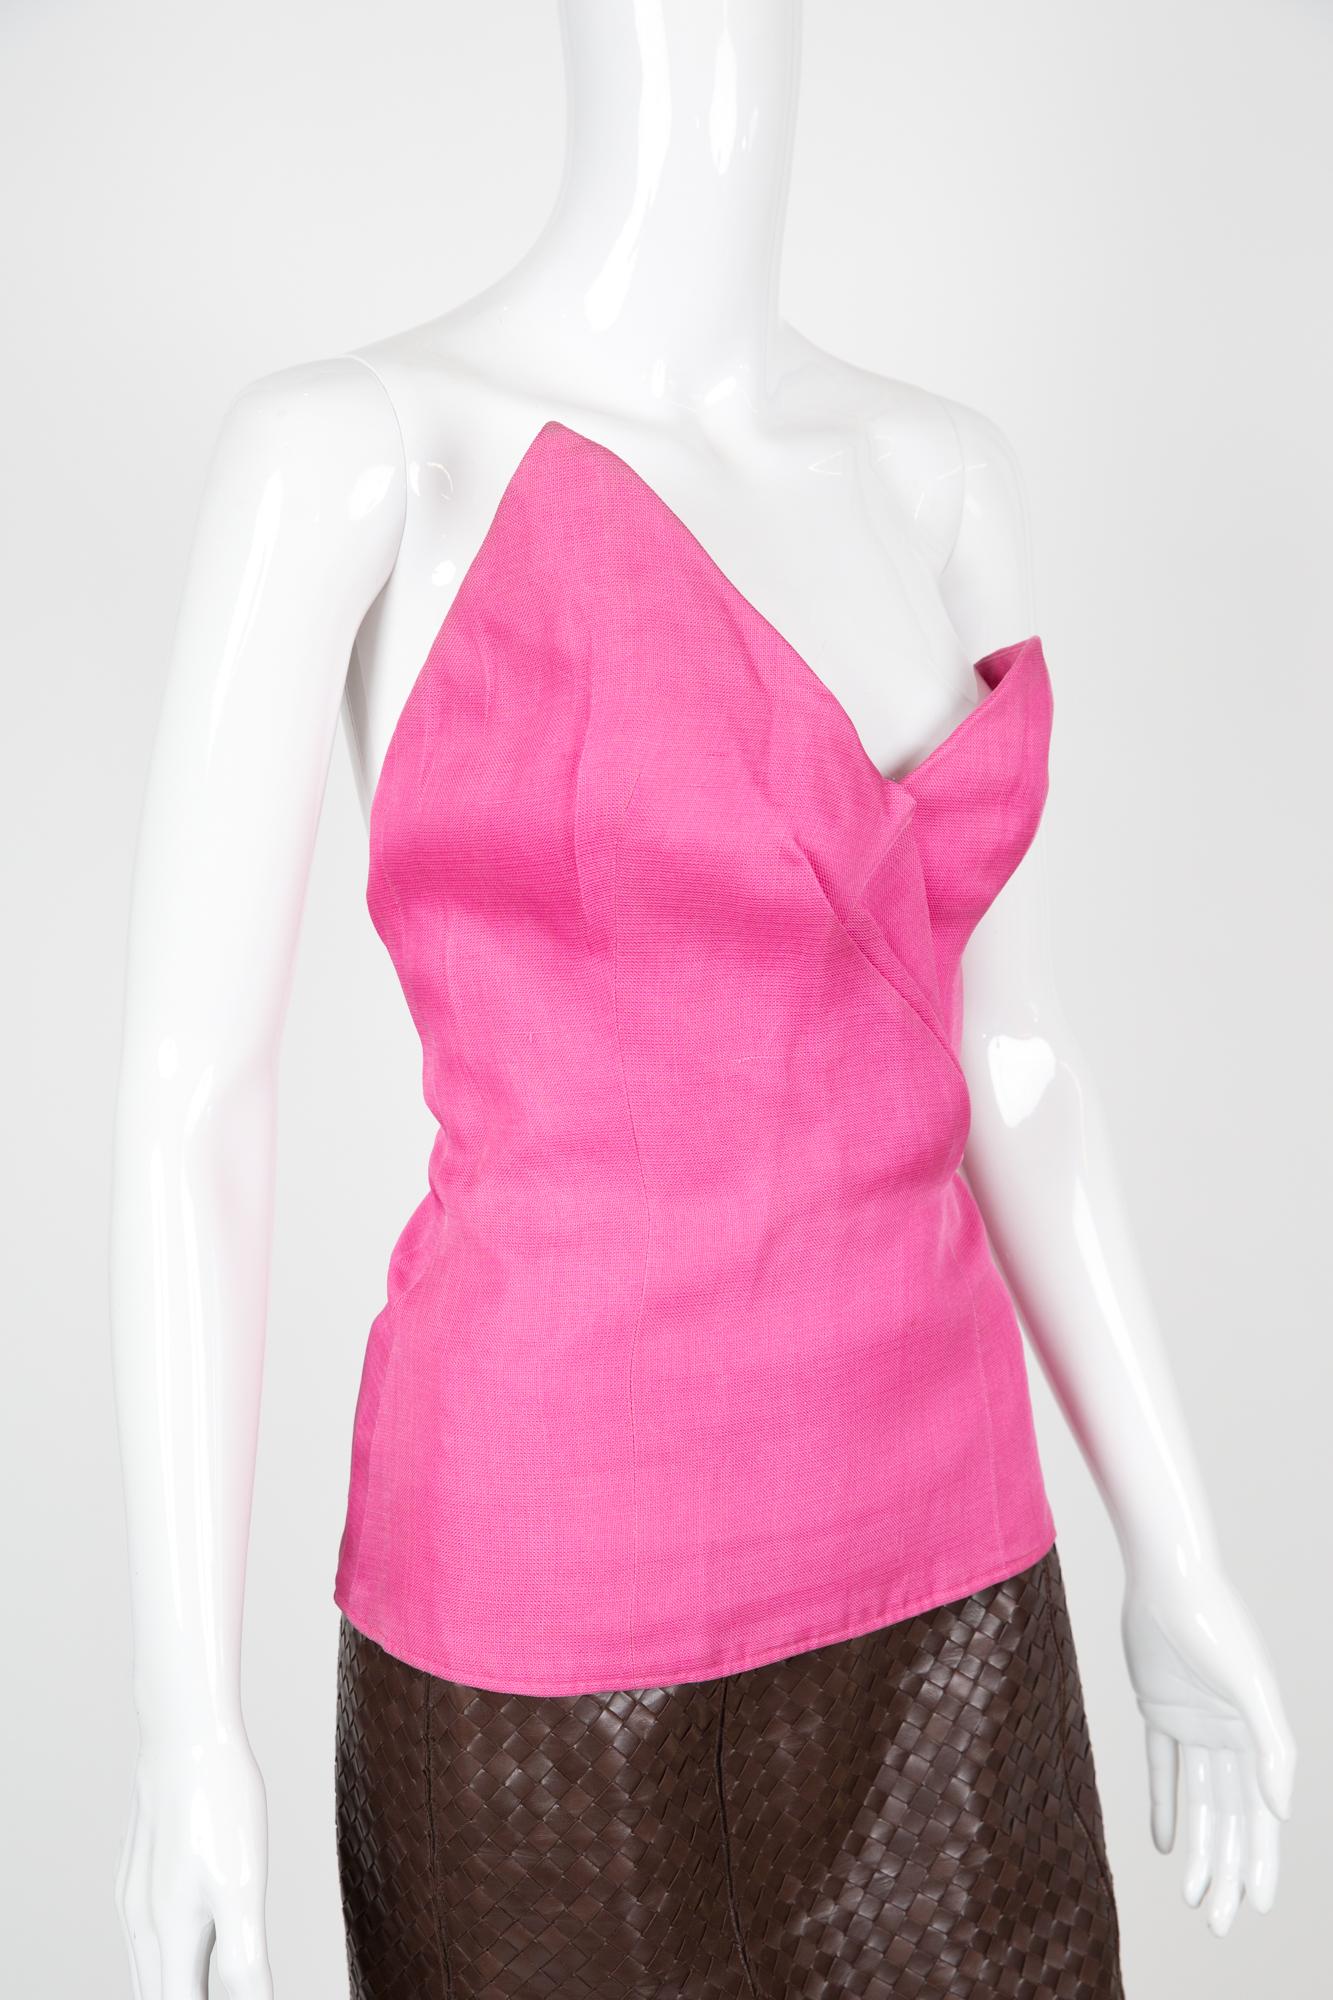 Yves Saint Laurent YSL pink silk asymmetric bustier top featuring an asymmetric front part, inside an attached belt, side zip opening, front pleats details.
Circa 1990s
Composition: 100% silk
Label size 36fr/ US4/ UK8
Made in France. 
In good